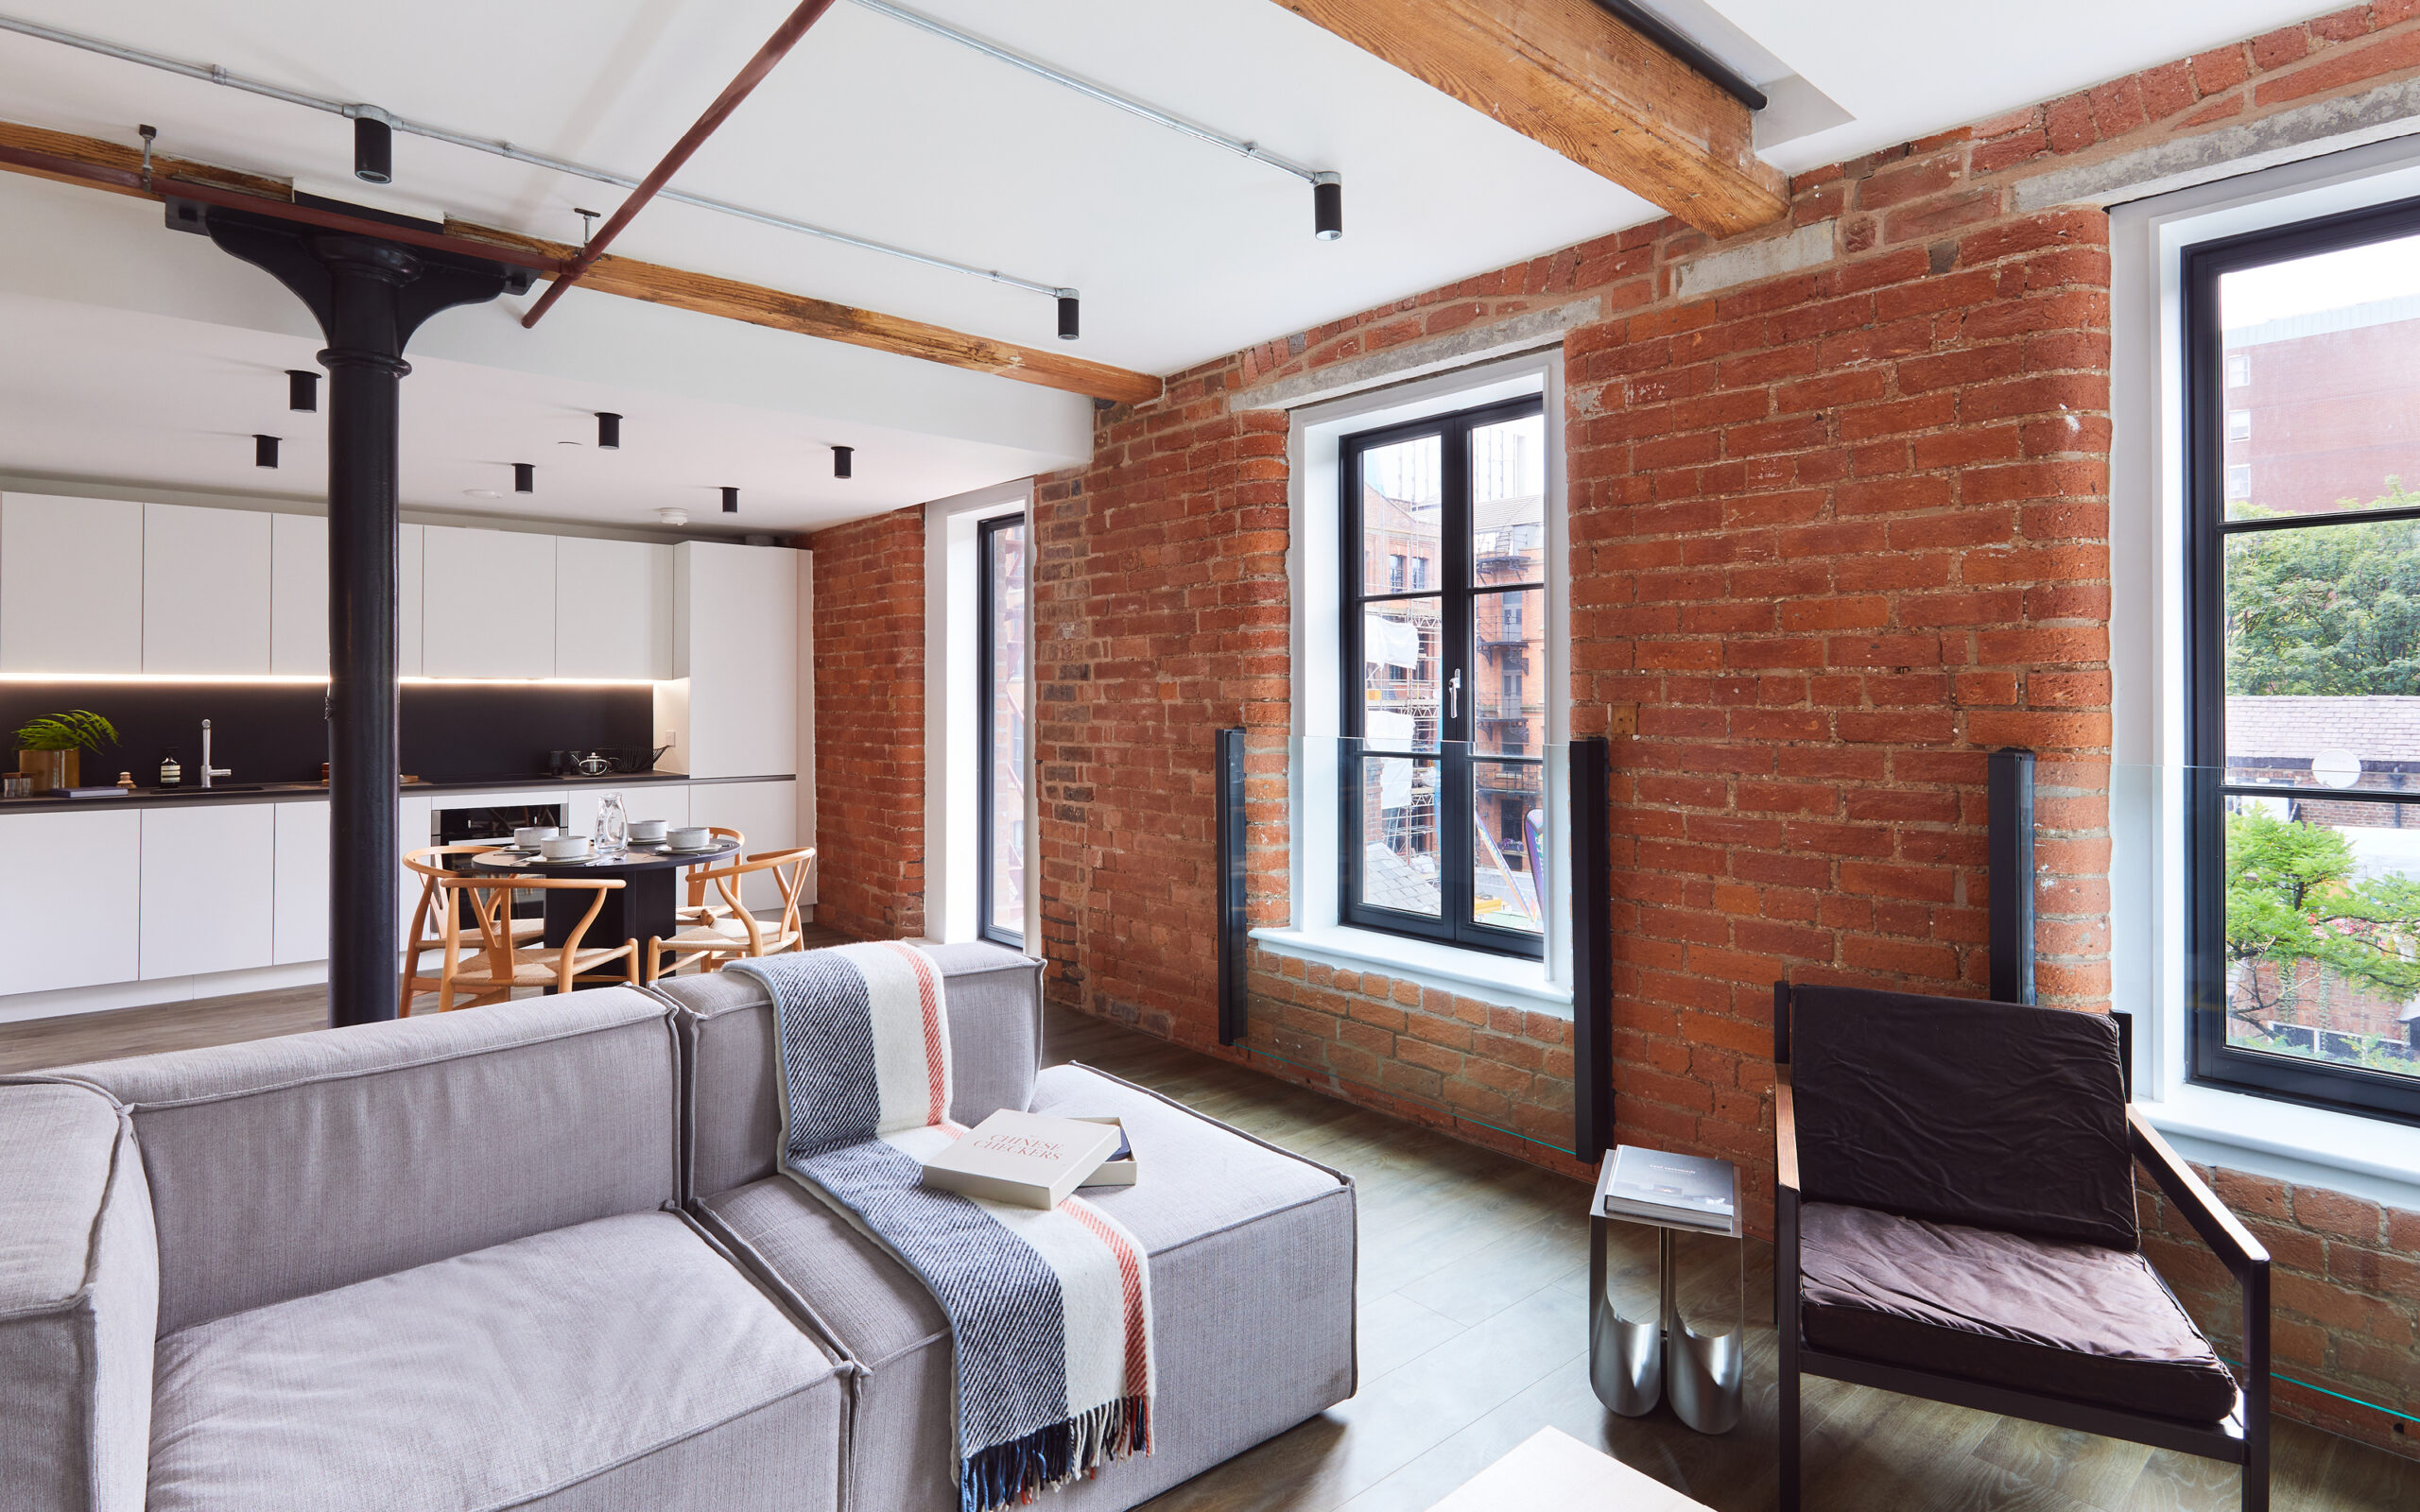 Industrial feel apartment with raw brickwork but modern clean kitchen and dining space.